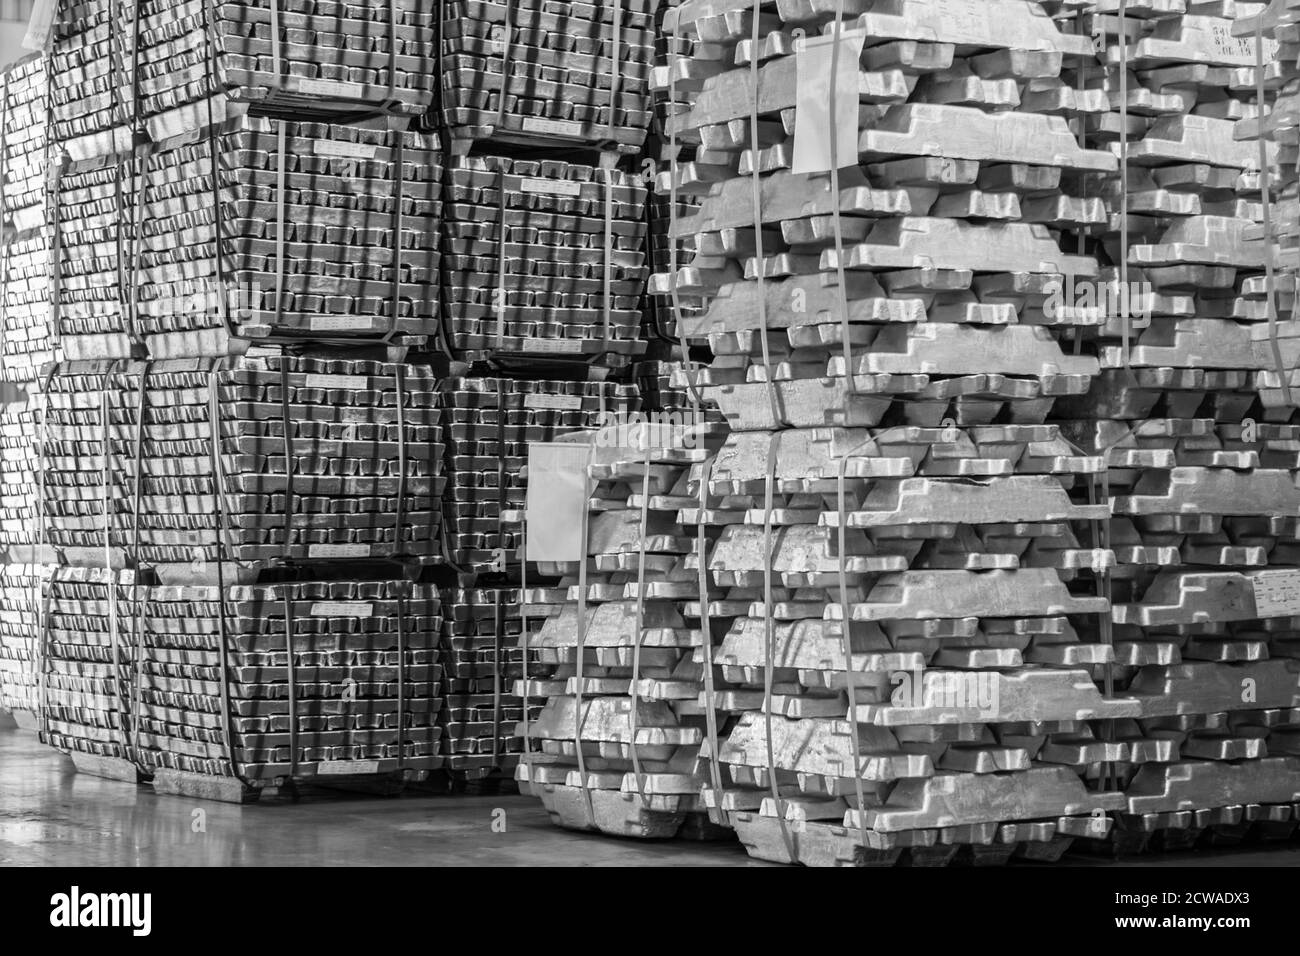 Aluminum ingot bar stacked in warehouse. Raw material for industrial concept. General cargo warehouse concept Stock Photo